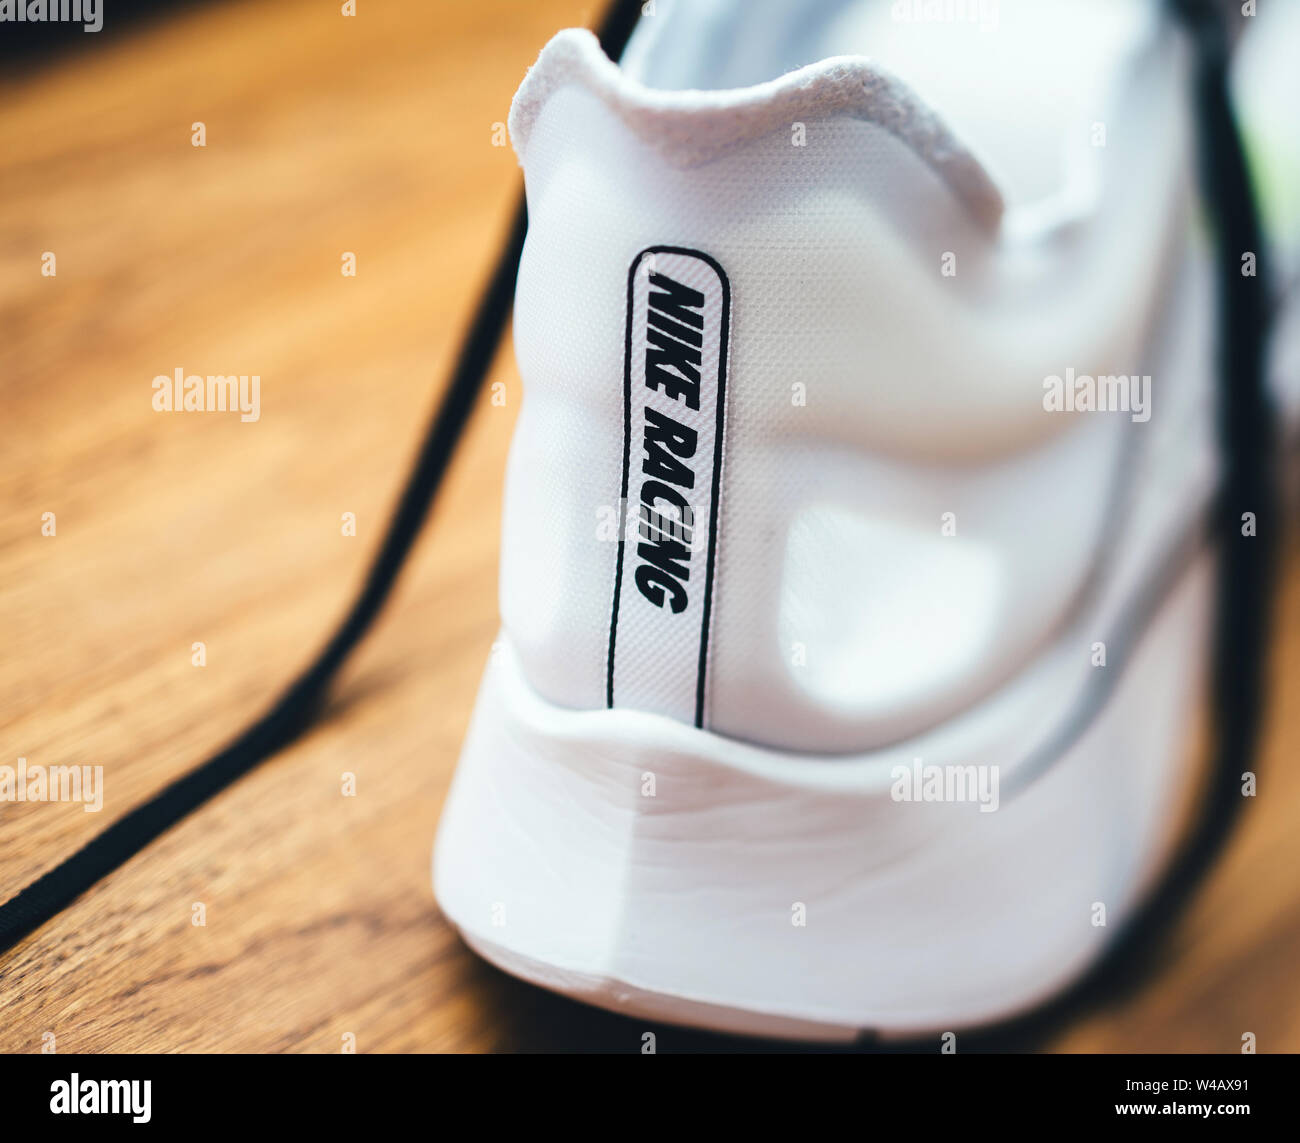 Paris, France - Jul 8, 2019: Macro rear view of new Nike Zoom Fly SP Fast  running shoes on wooden table - includes the Nike Racing logotype insignia  Stock Photo - Alamy